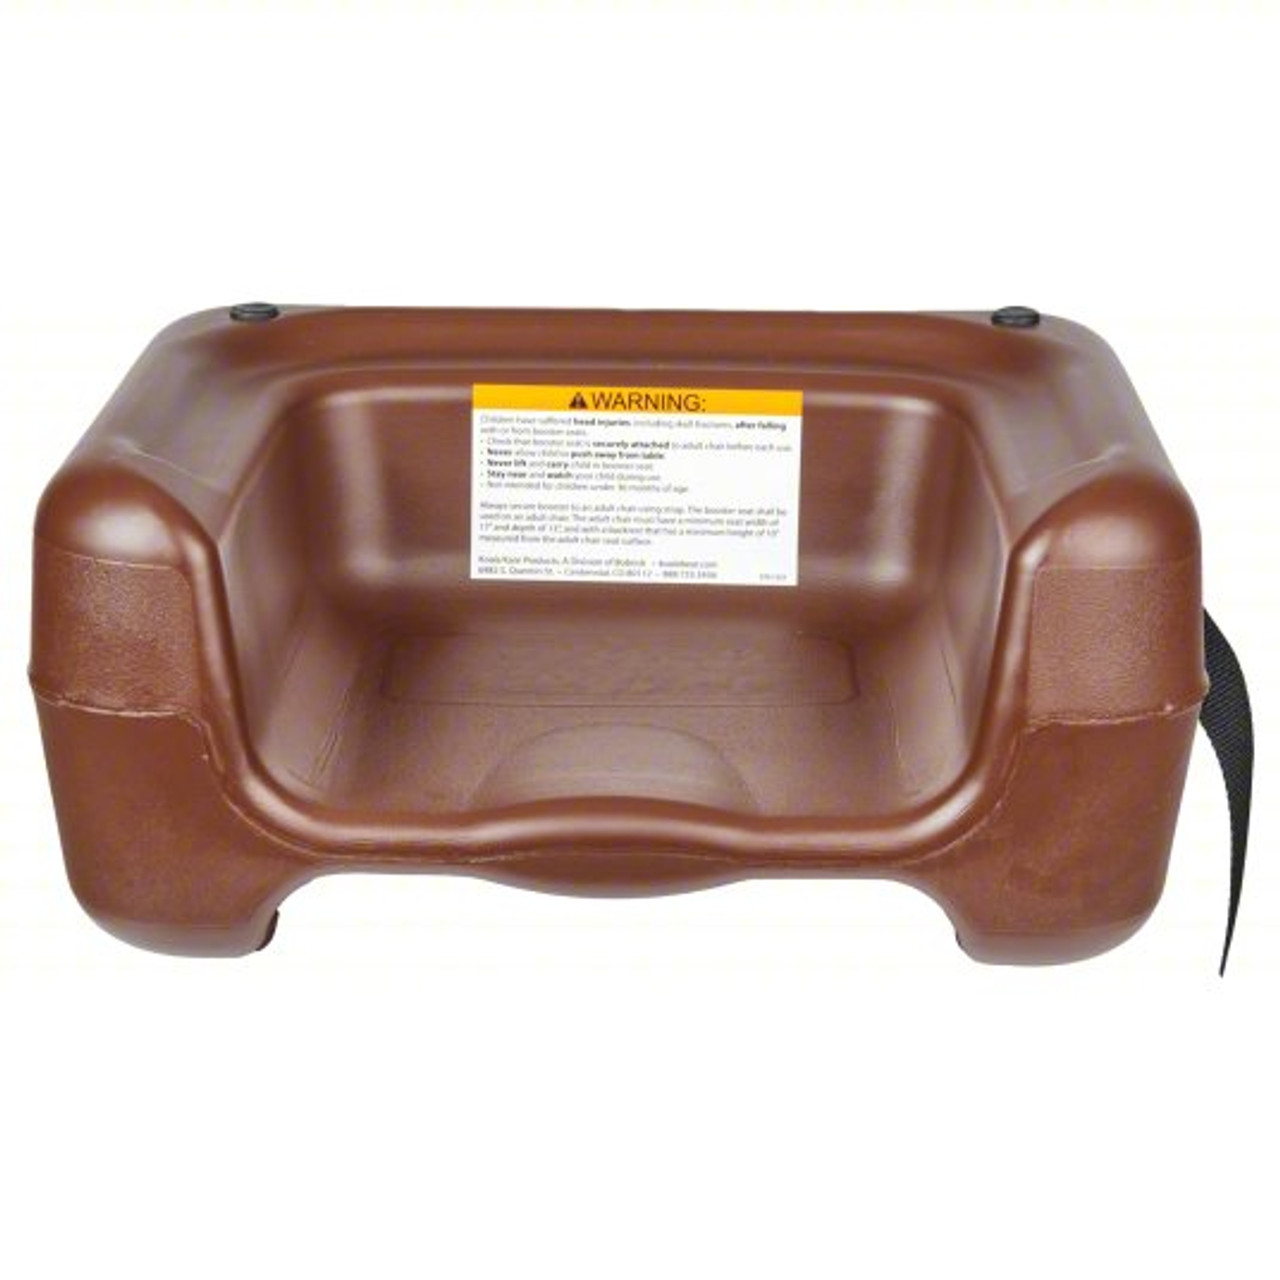 Koala Kare KB854-09S Brown Plastic Booster Seat with Safety Strap - Dual Height - Safe and Versatile Dining- CHICKEN PIECES